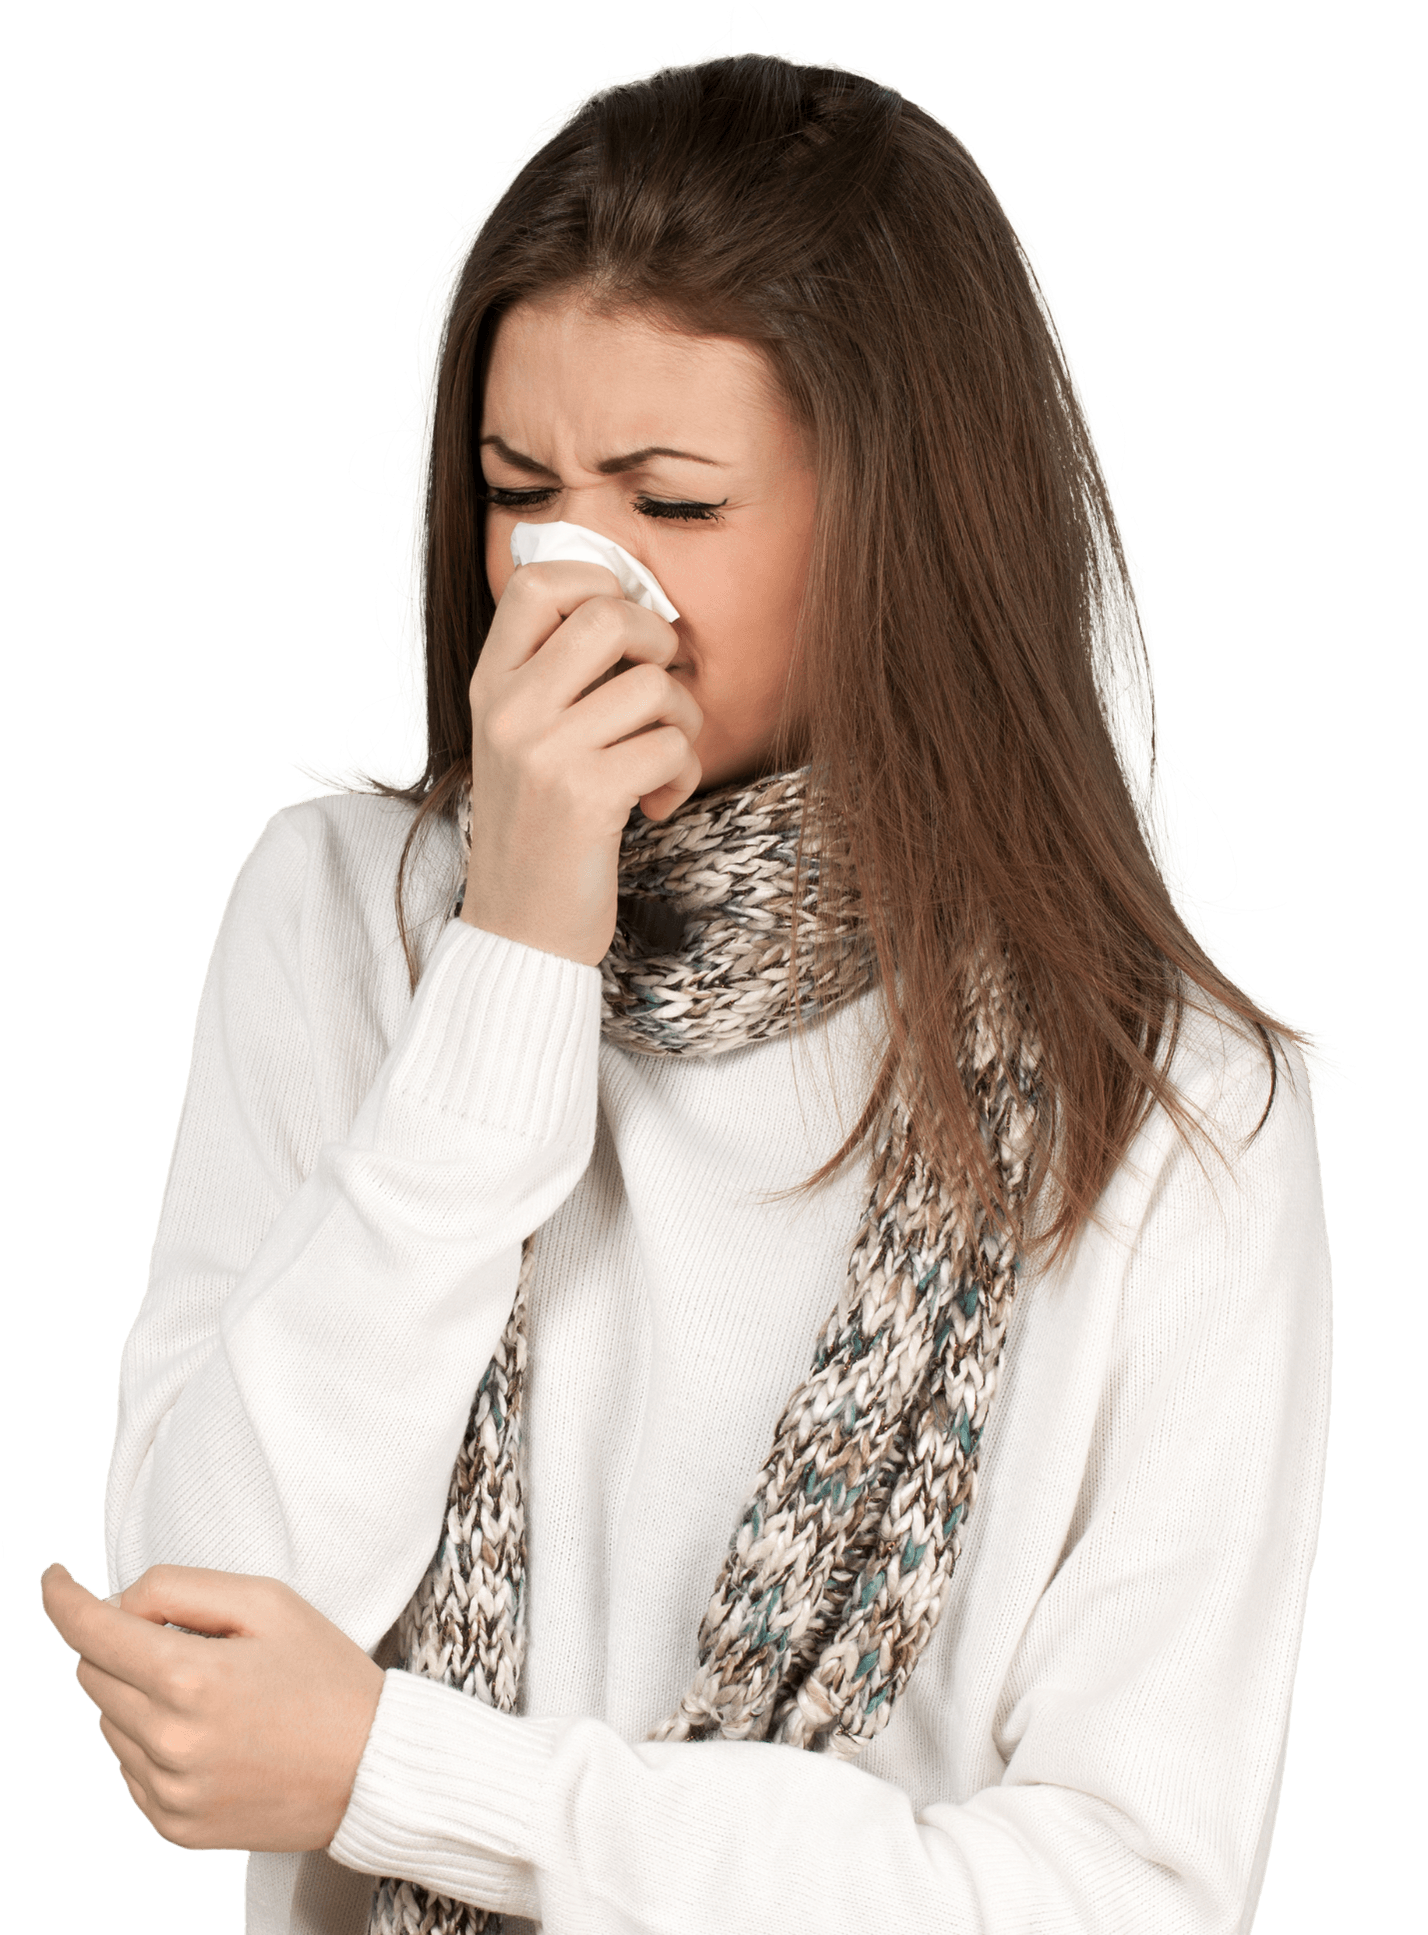 A woman holding tissue to her nose suffers from allergic rhinitis